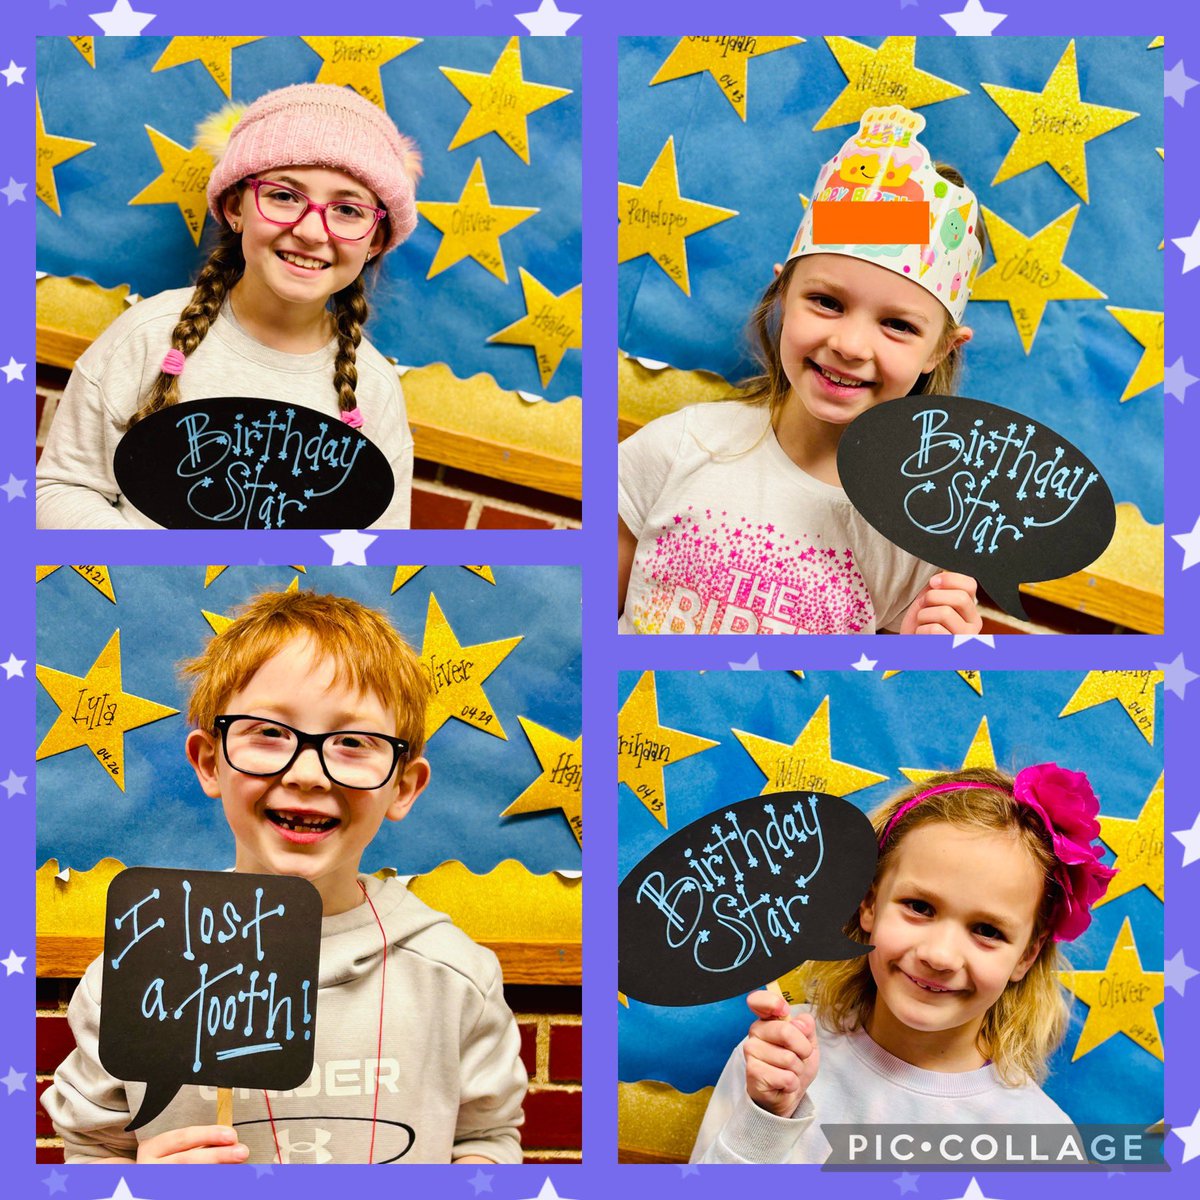 So many smiles from our Friday MVPs! #dg58pride #fa58share